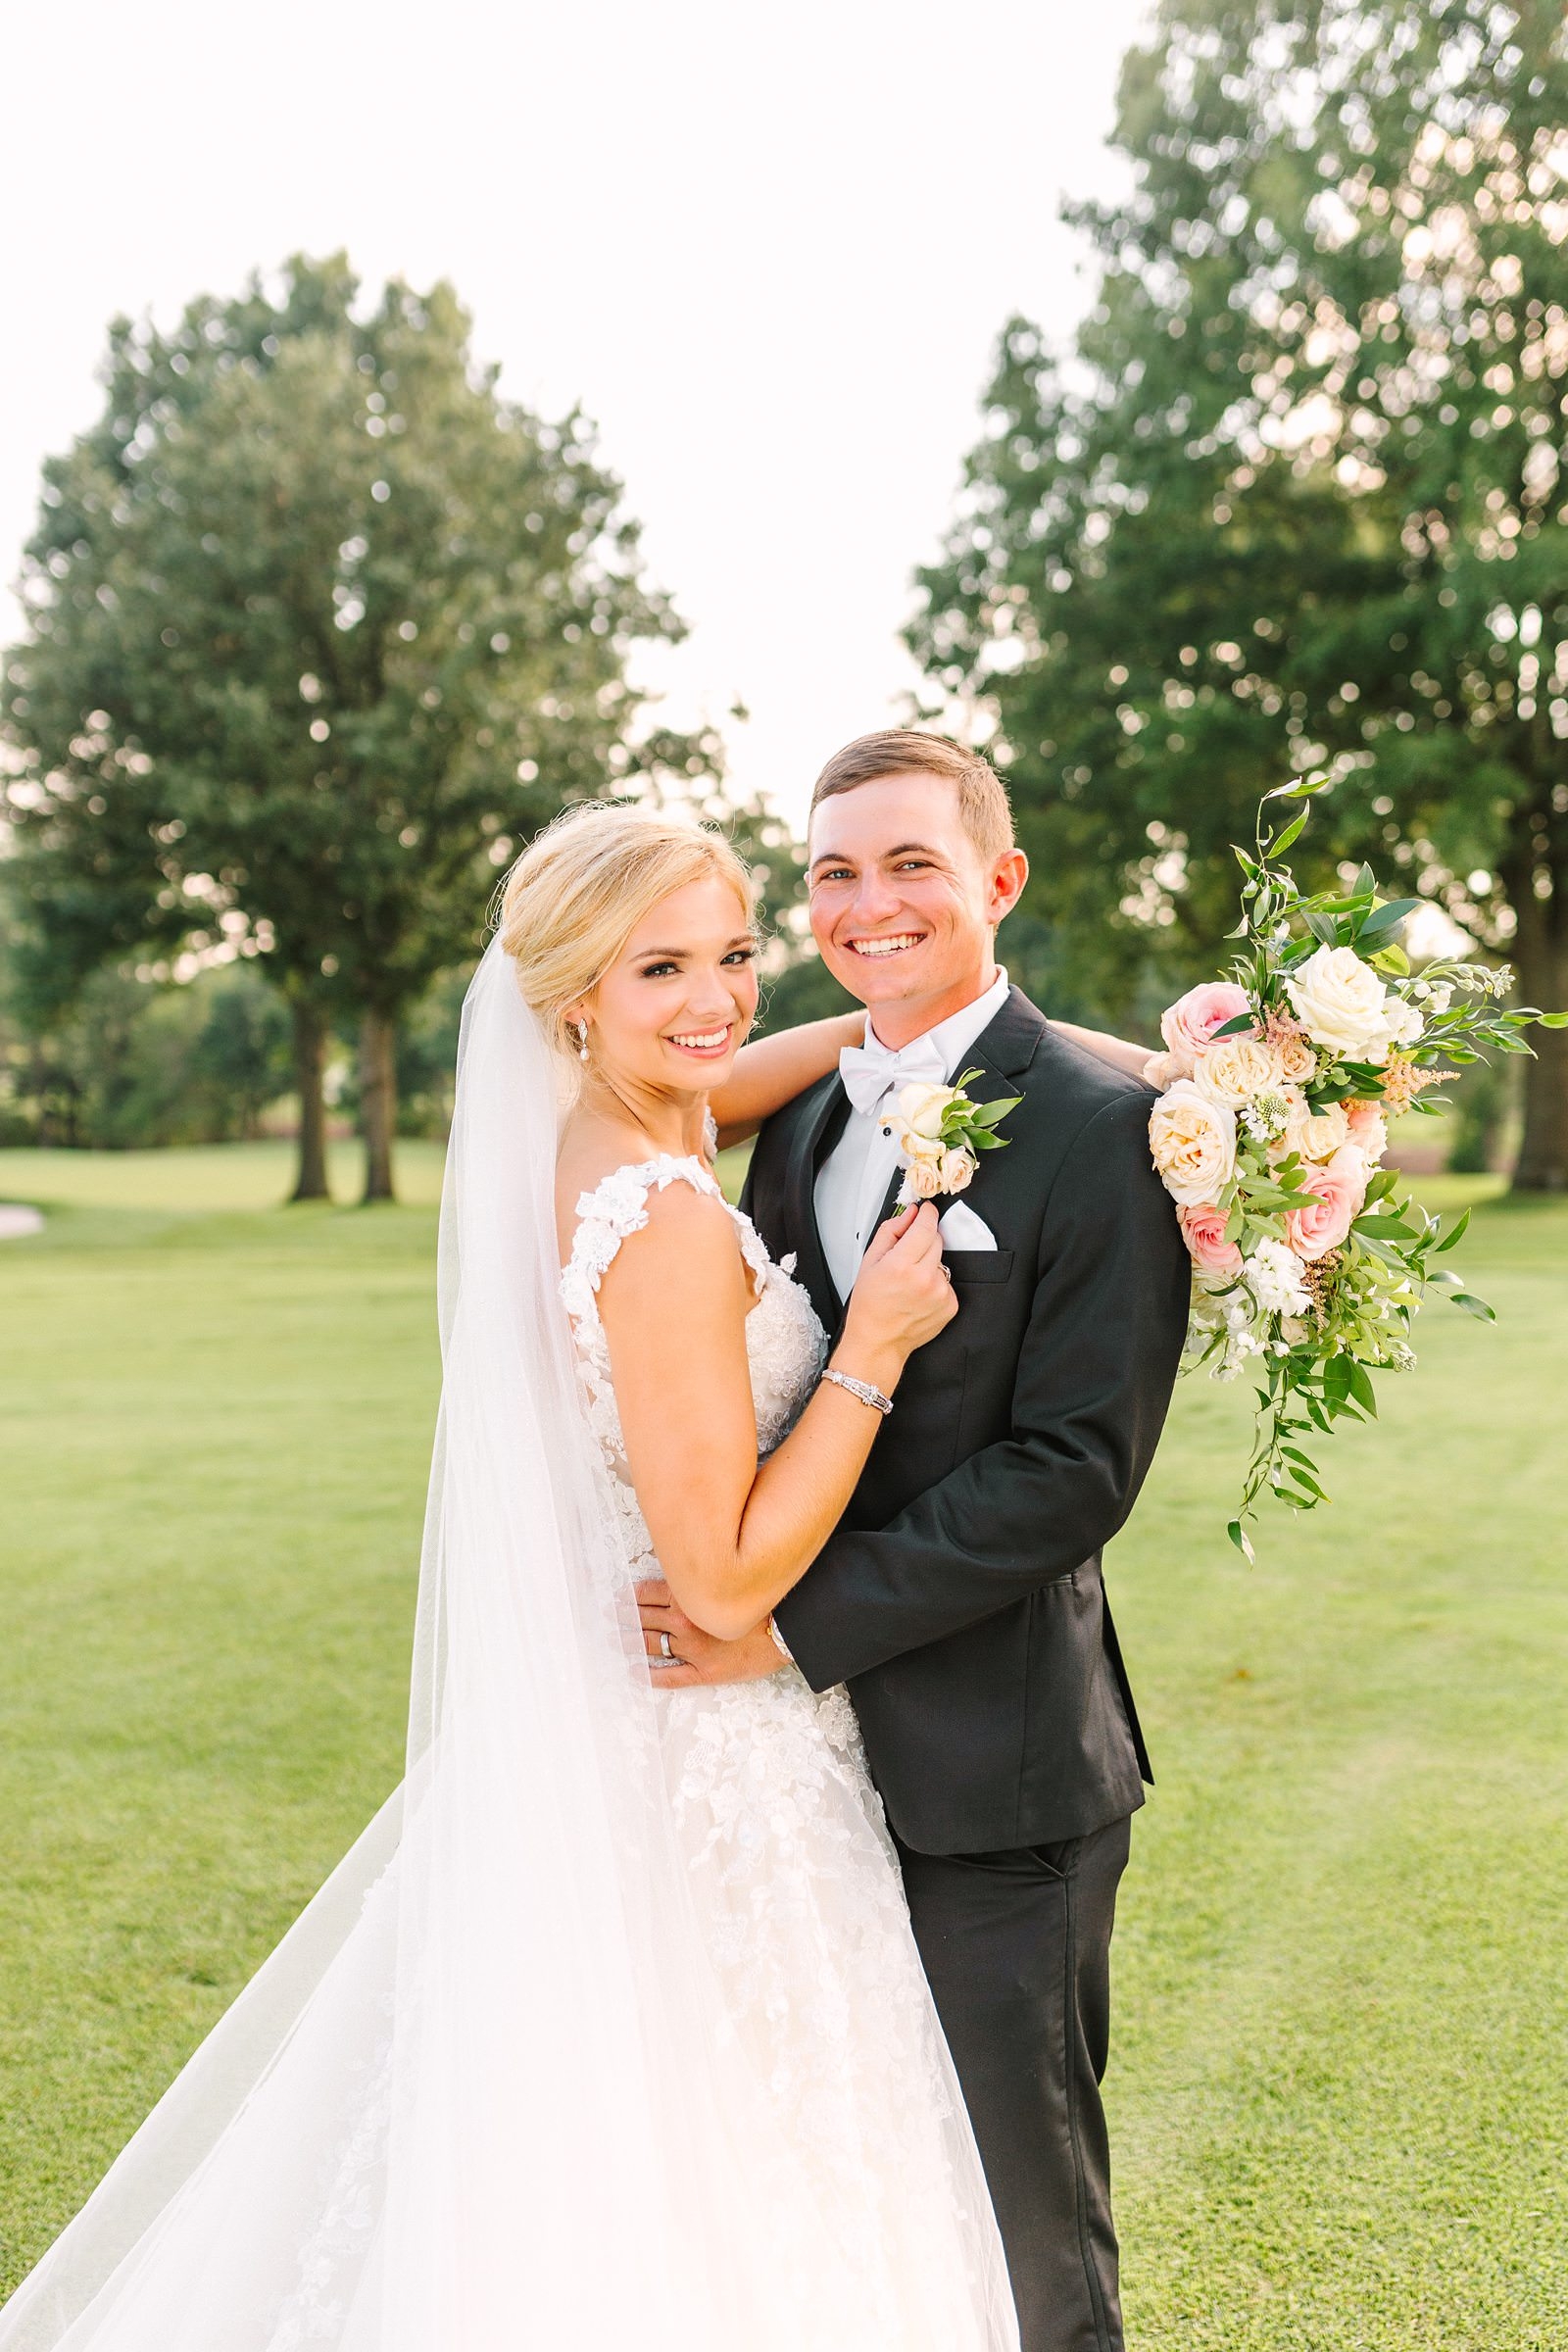  An Evansville Country Club Wedding Kelsi and Andrew168.jpg